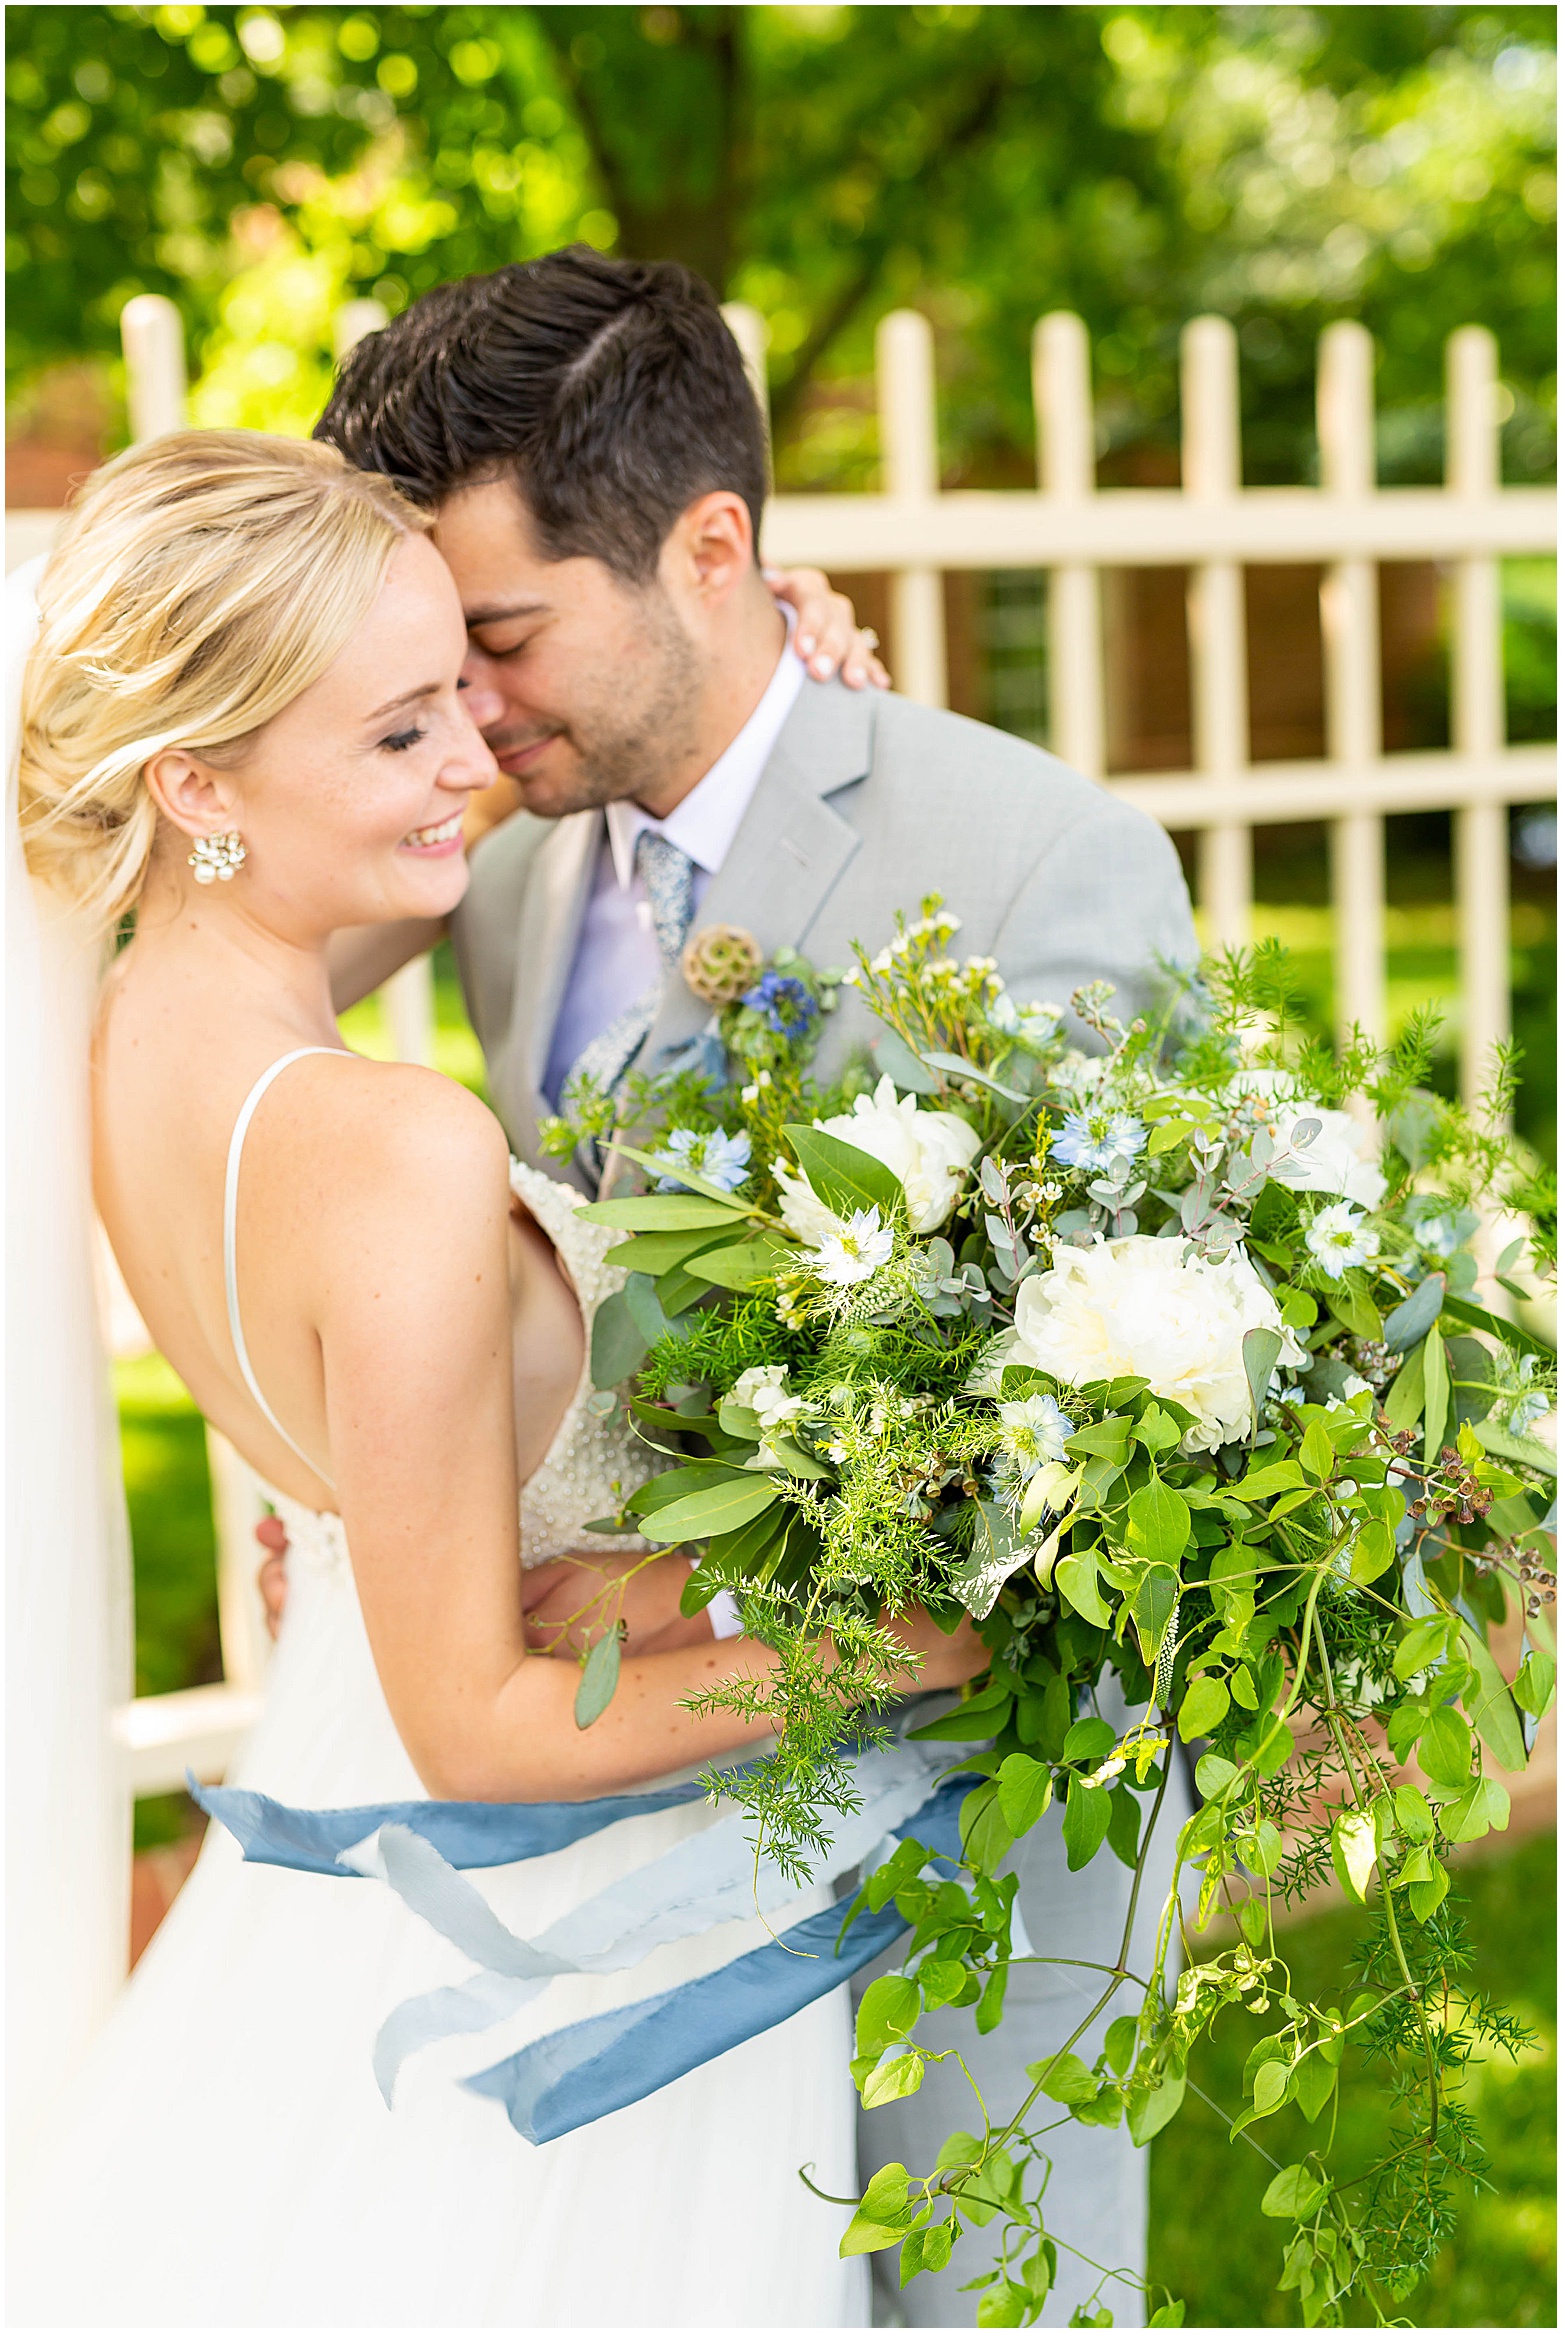 View More: http://hopetaylorphotographyphotos.pass.us/susie-and-darren